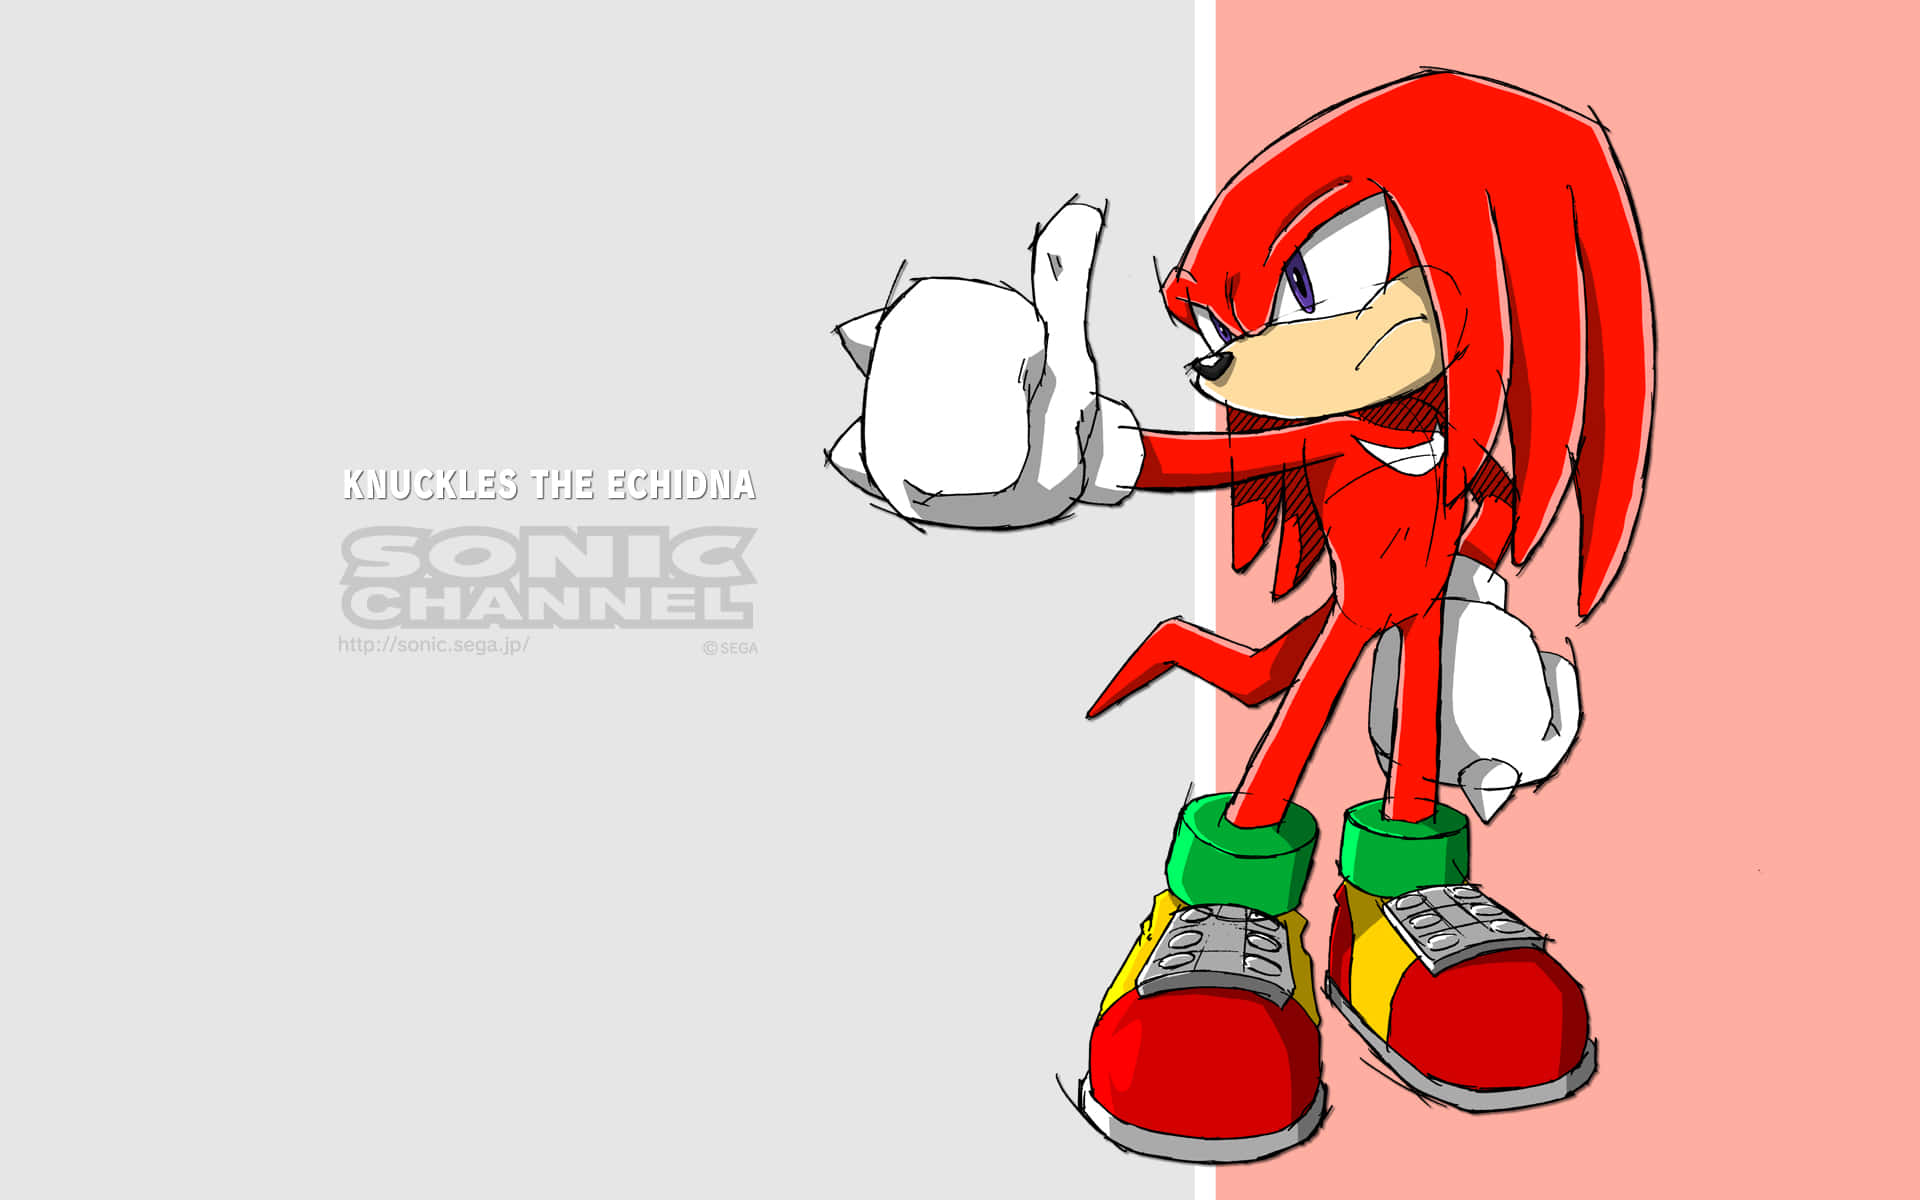 Knuckles The Echidna Stands Guard Against Injustice And Danger. Background